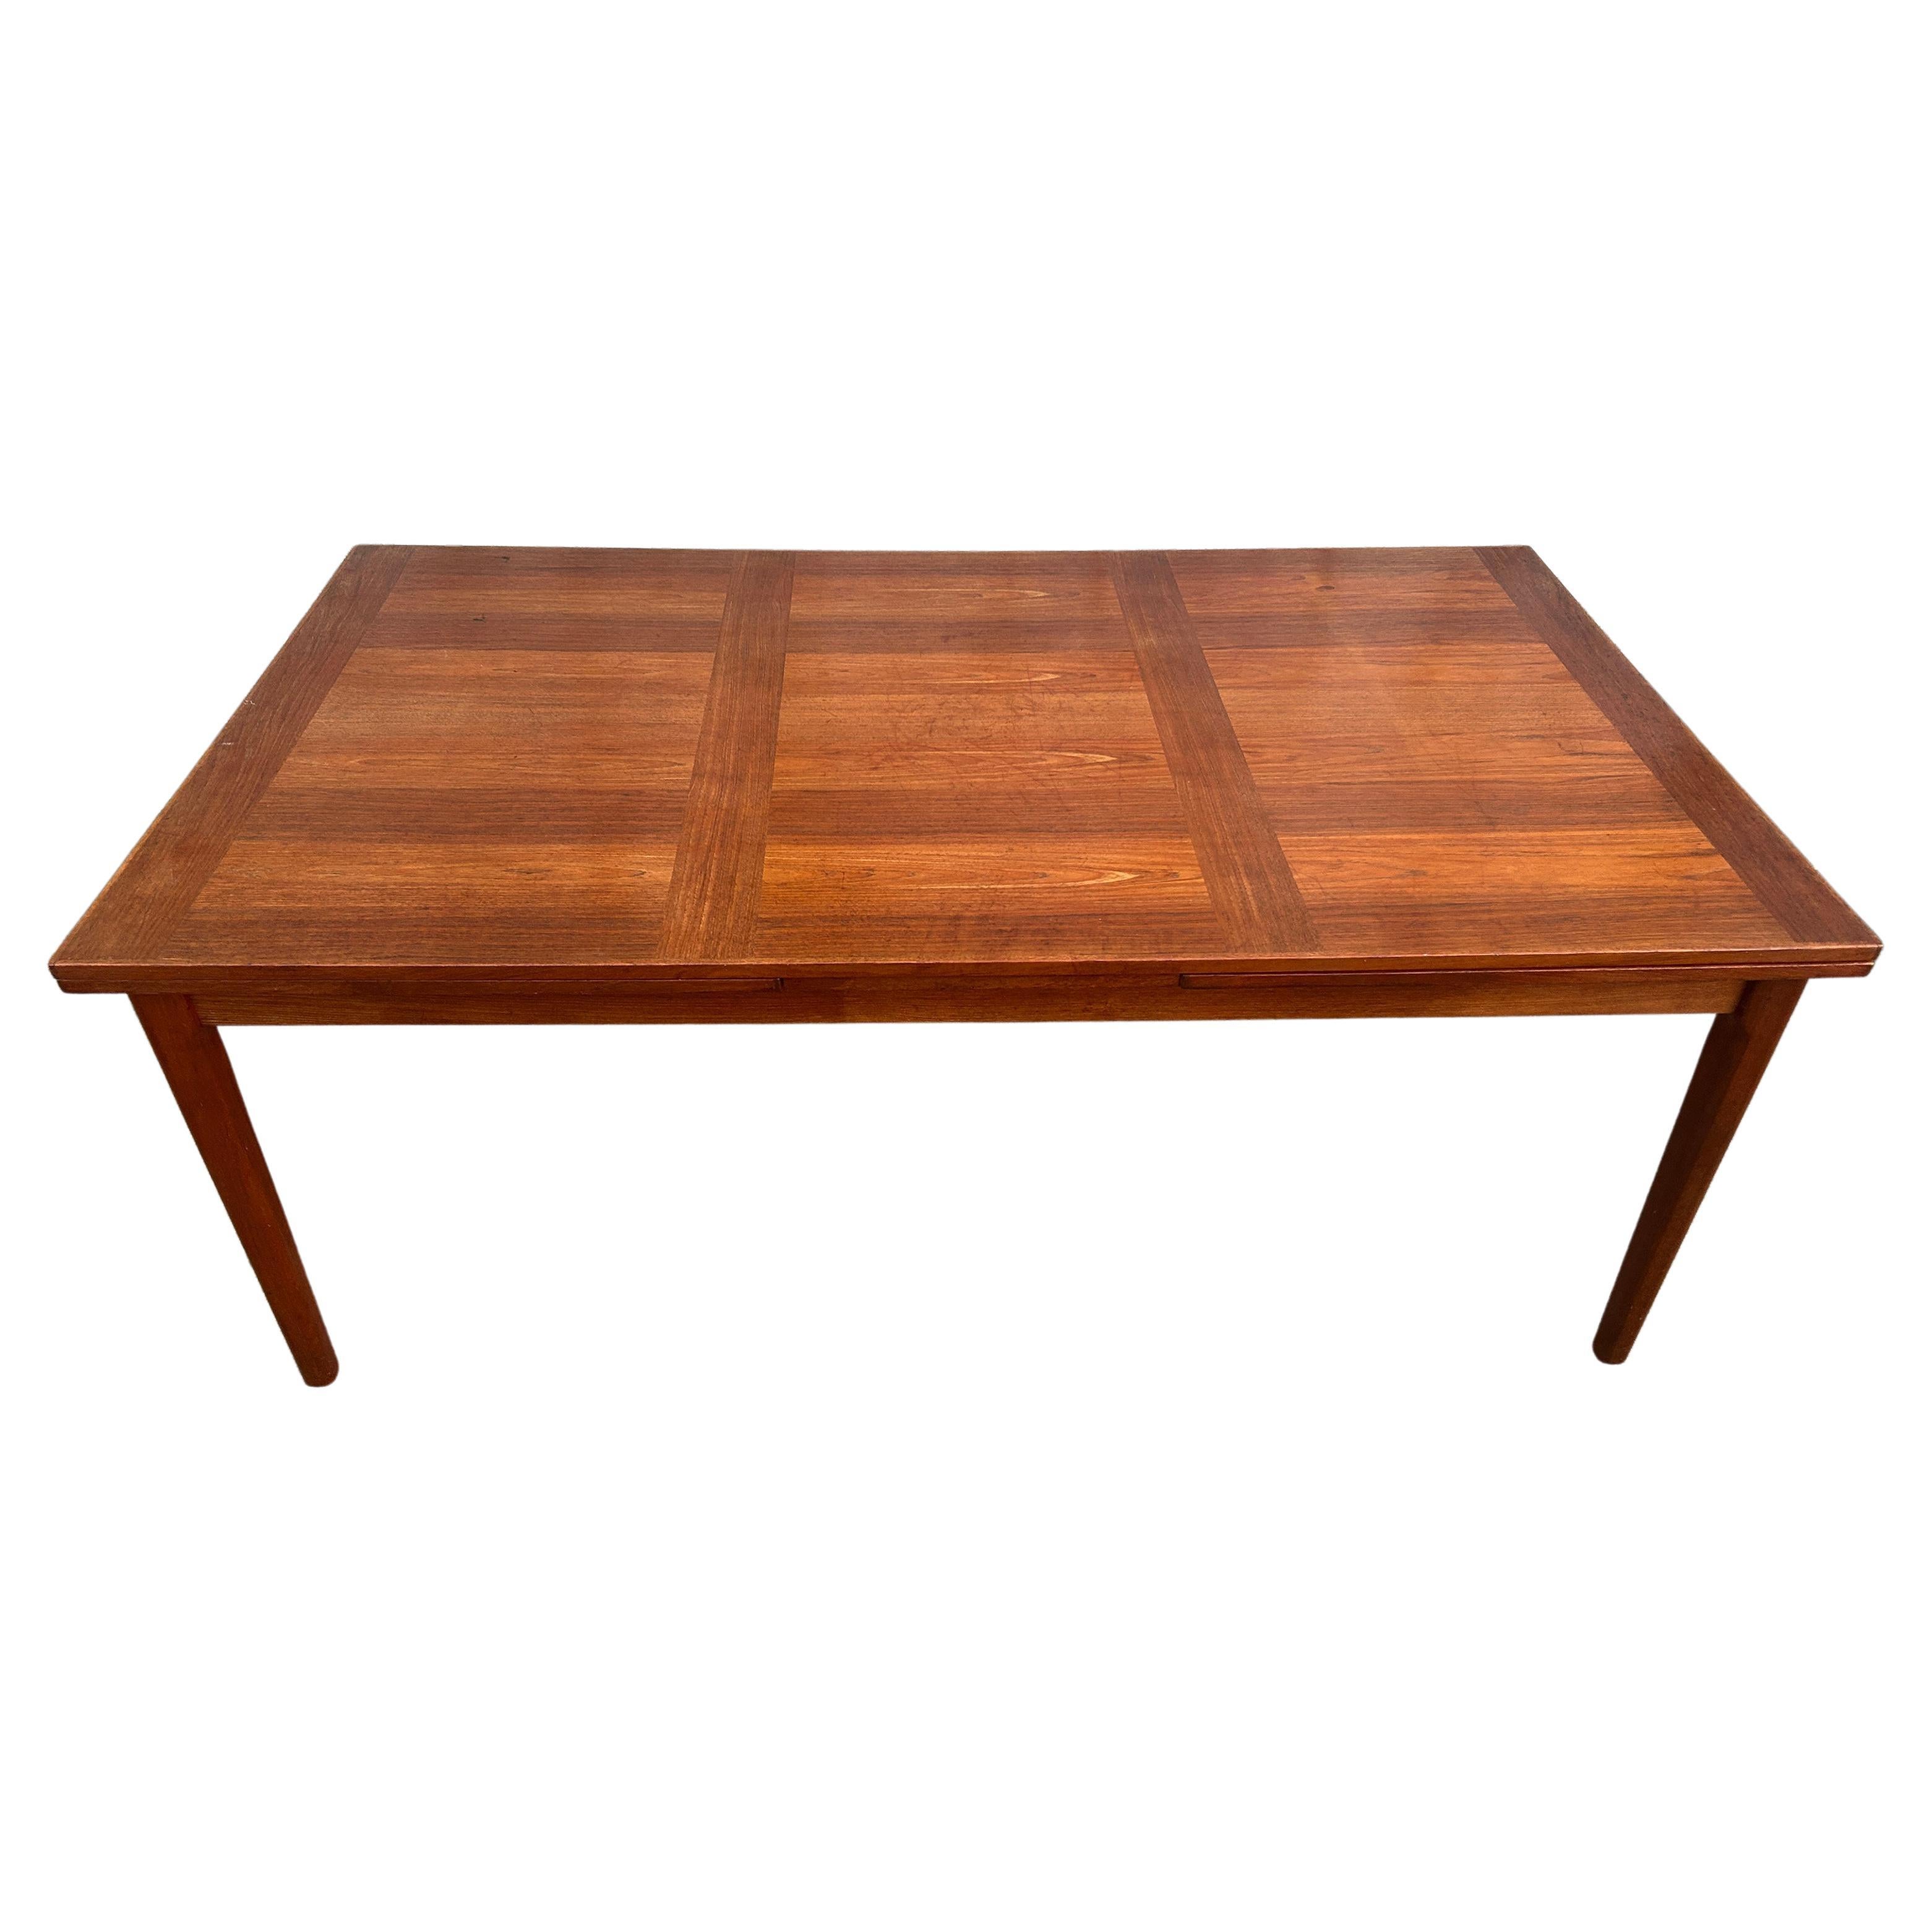 Mid century Danish modern teak extension dining table Denmark. Great Large Size Dining table with 2x 27” slide out hidden leaves. Rectangular design with solid teak rounded legs. Measures 72